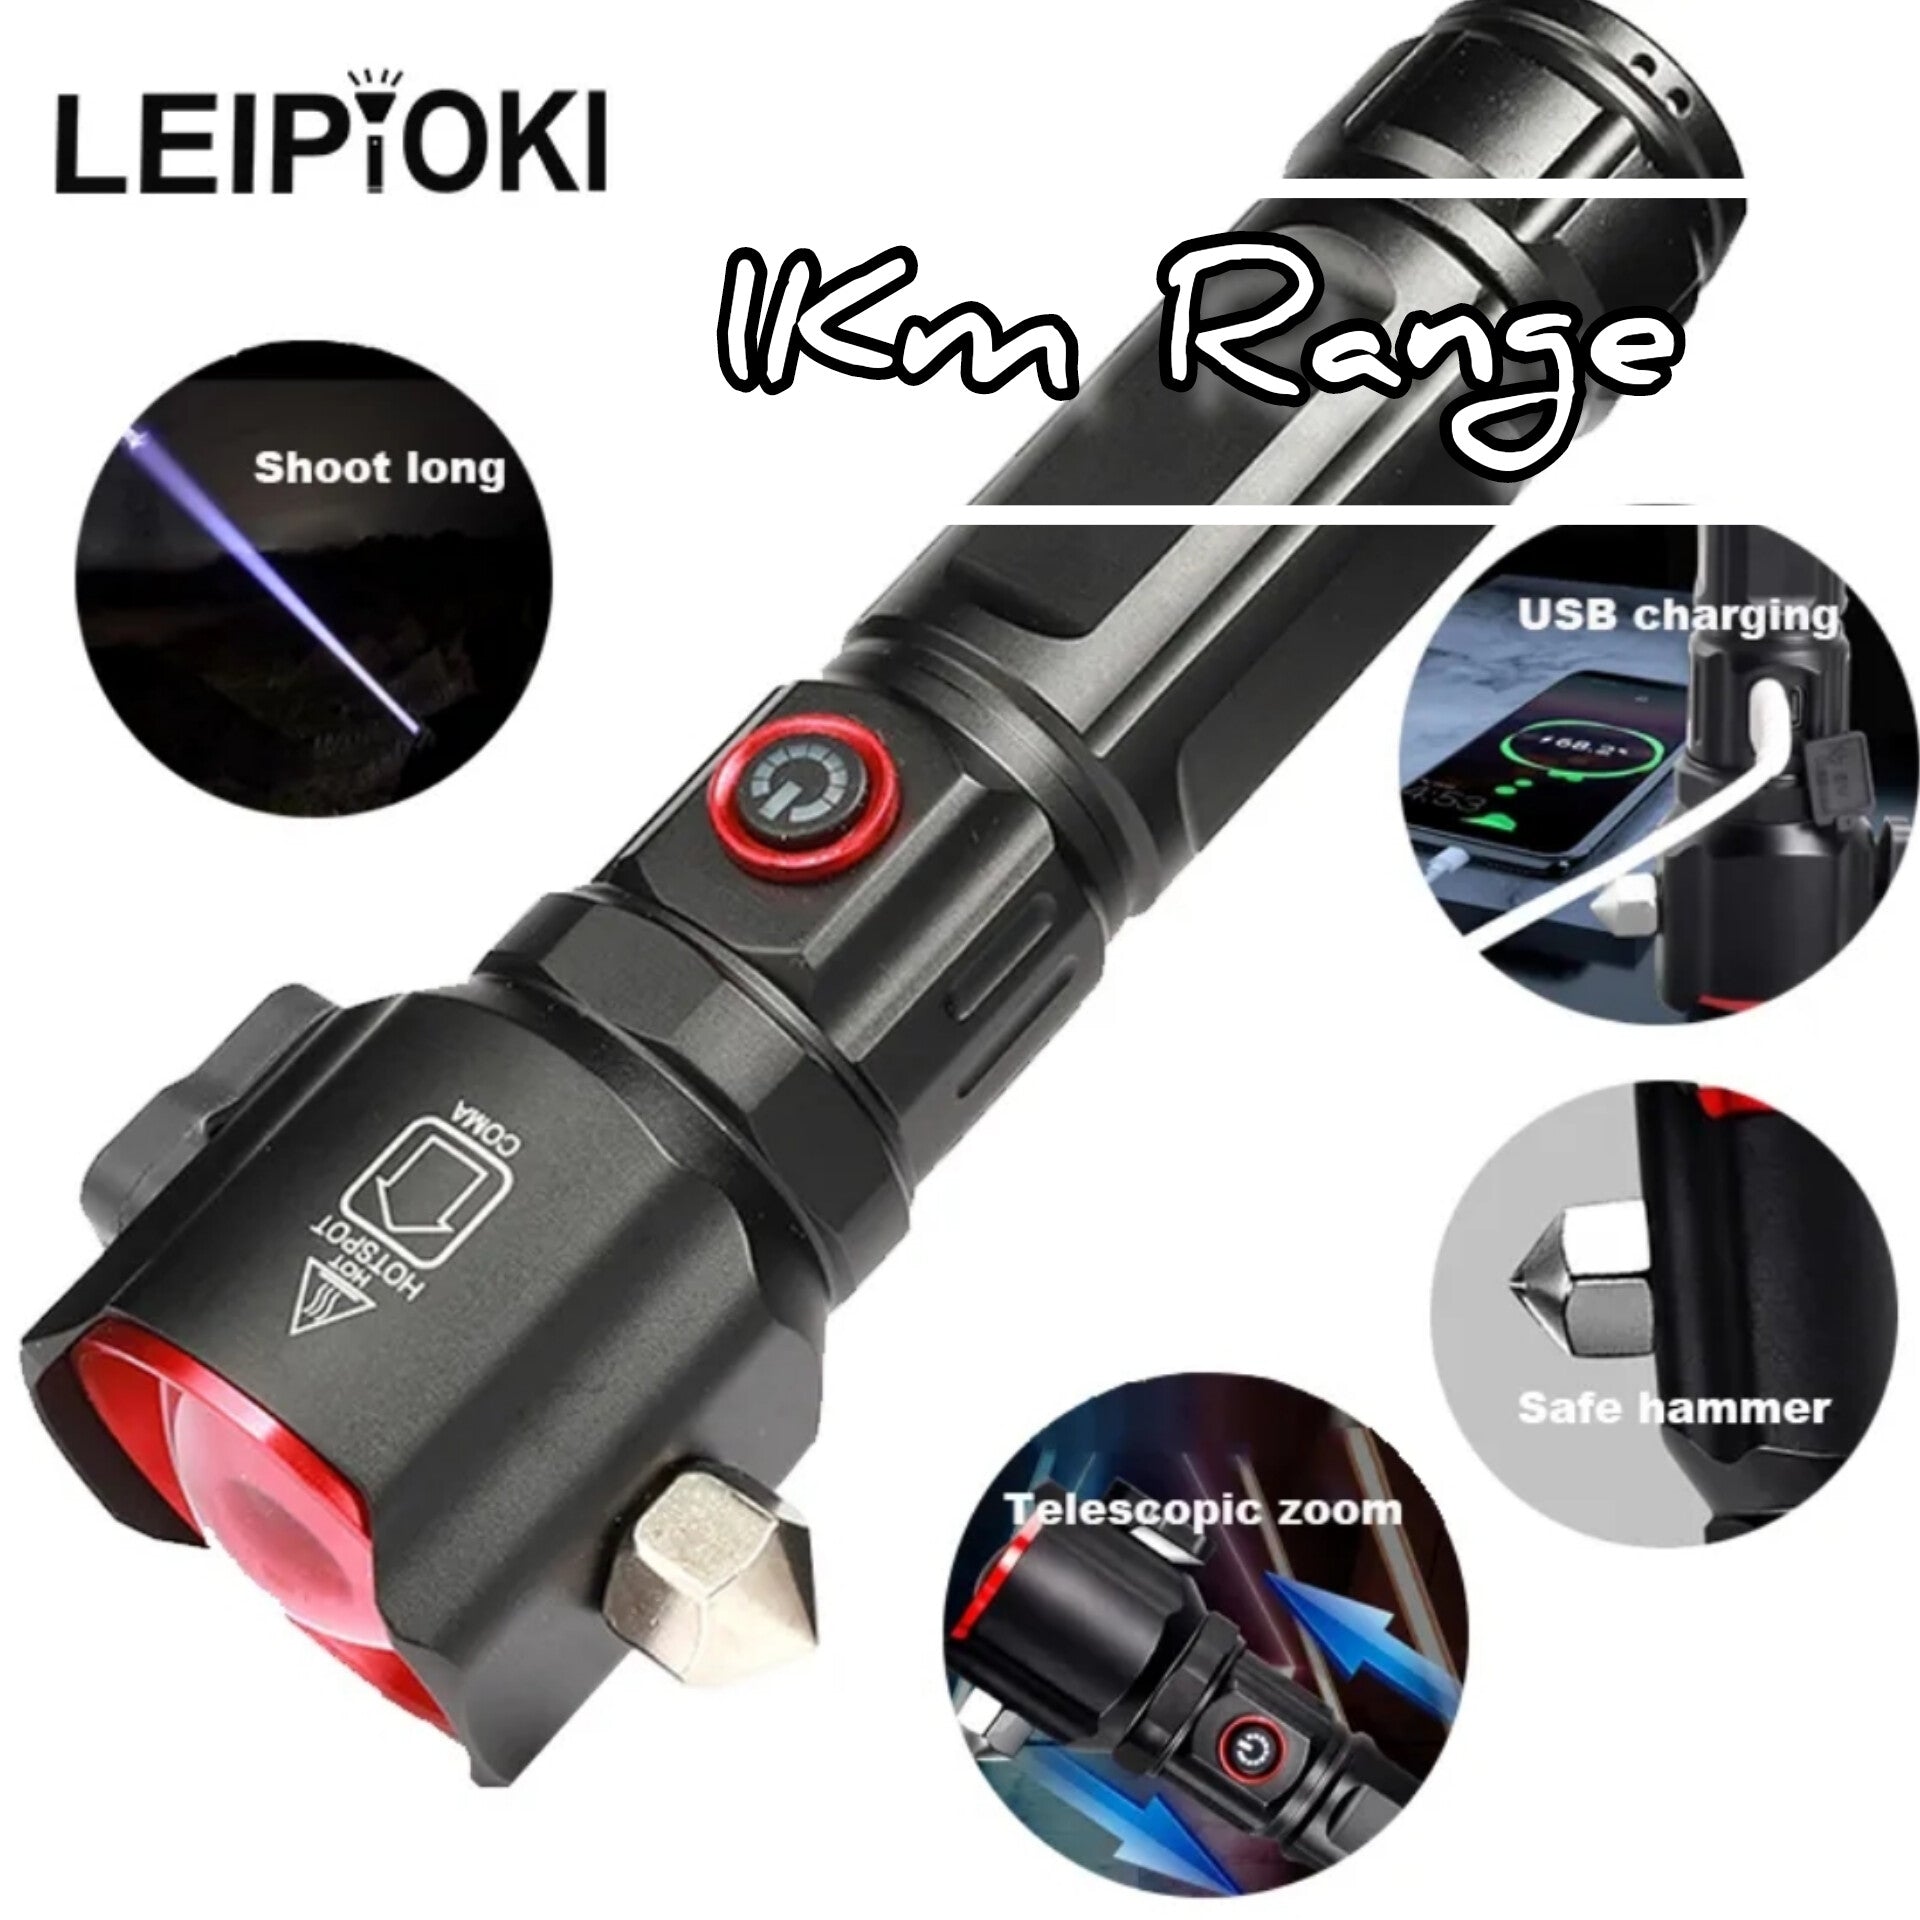 Hammer Imported 5 in 1 Rechargeable Flashlight & Power Bank - 1KM Range